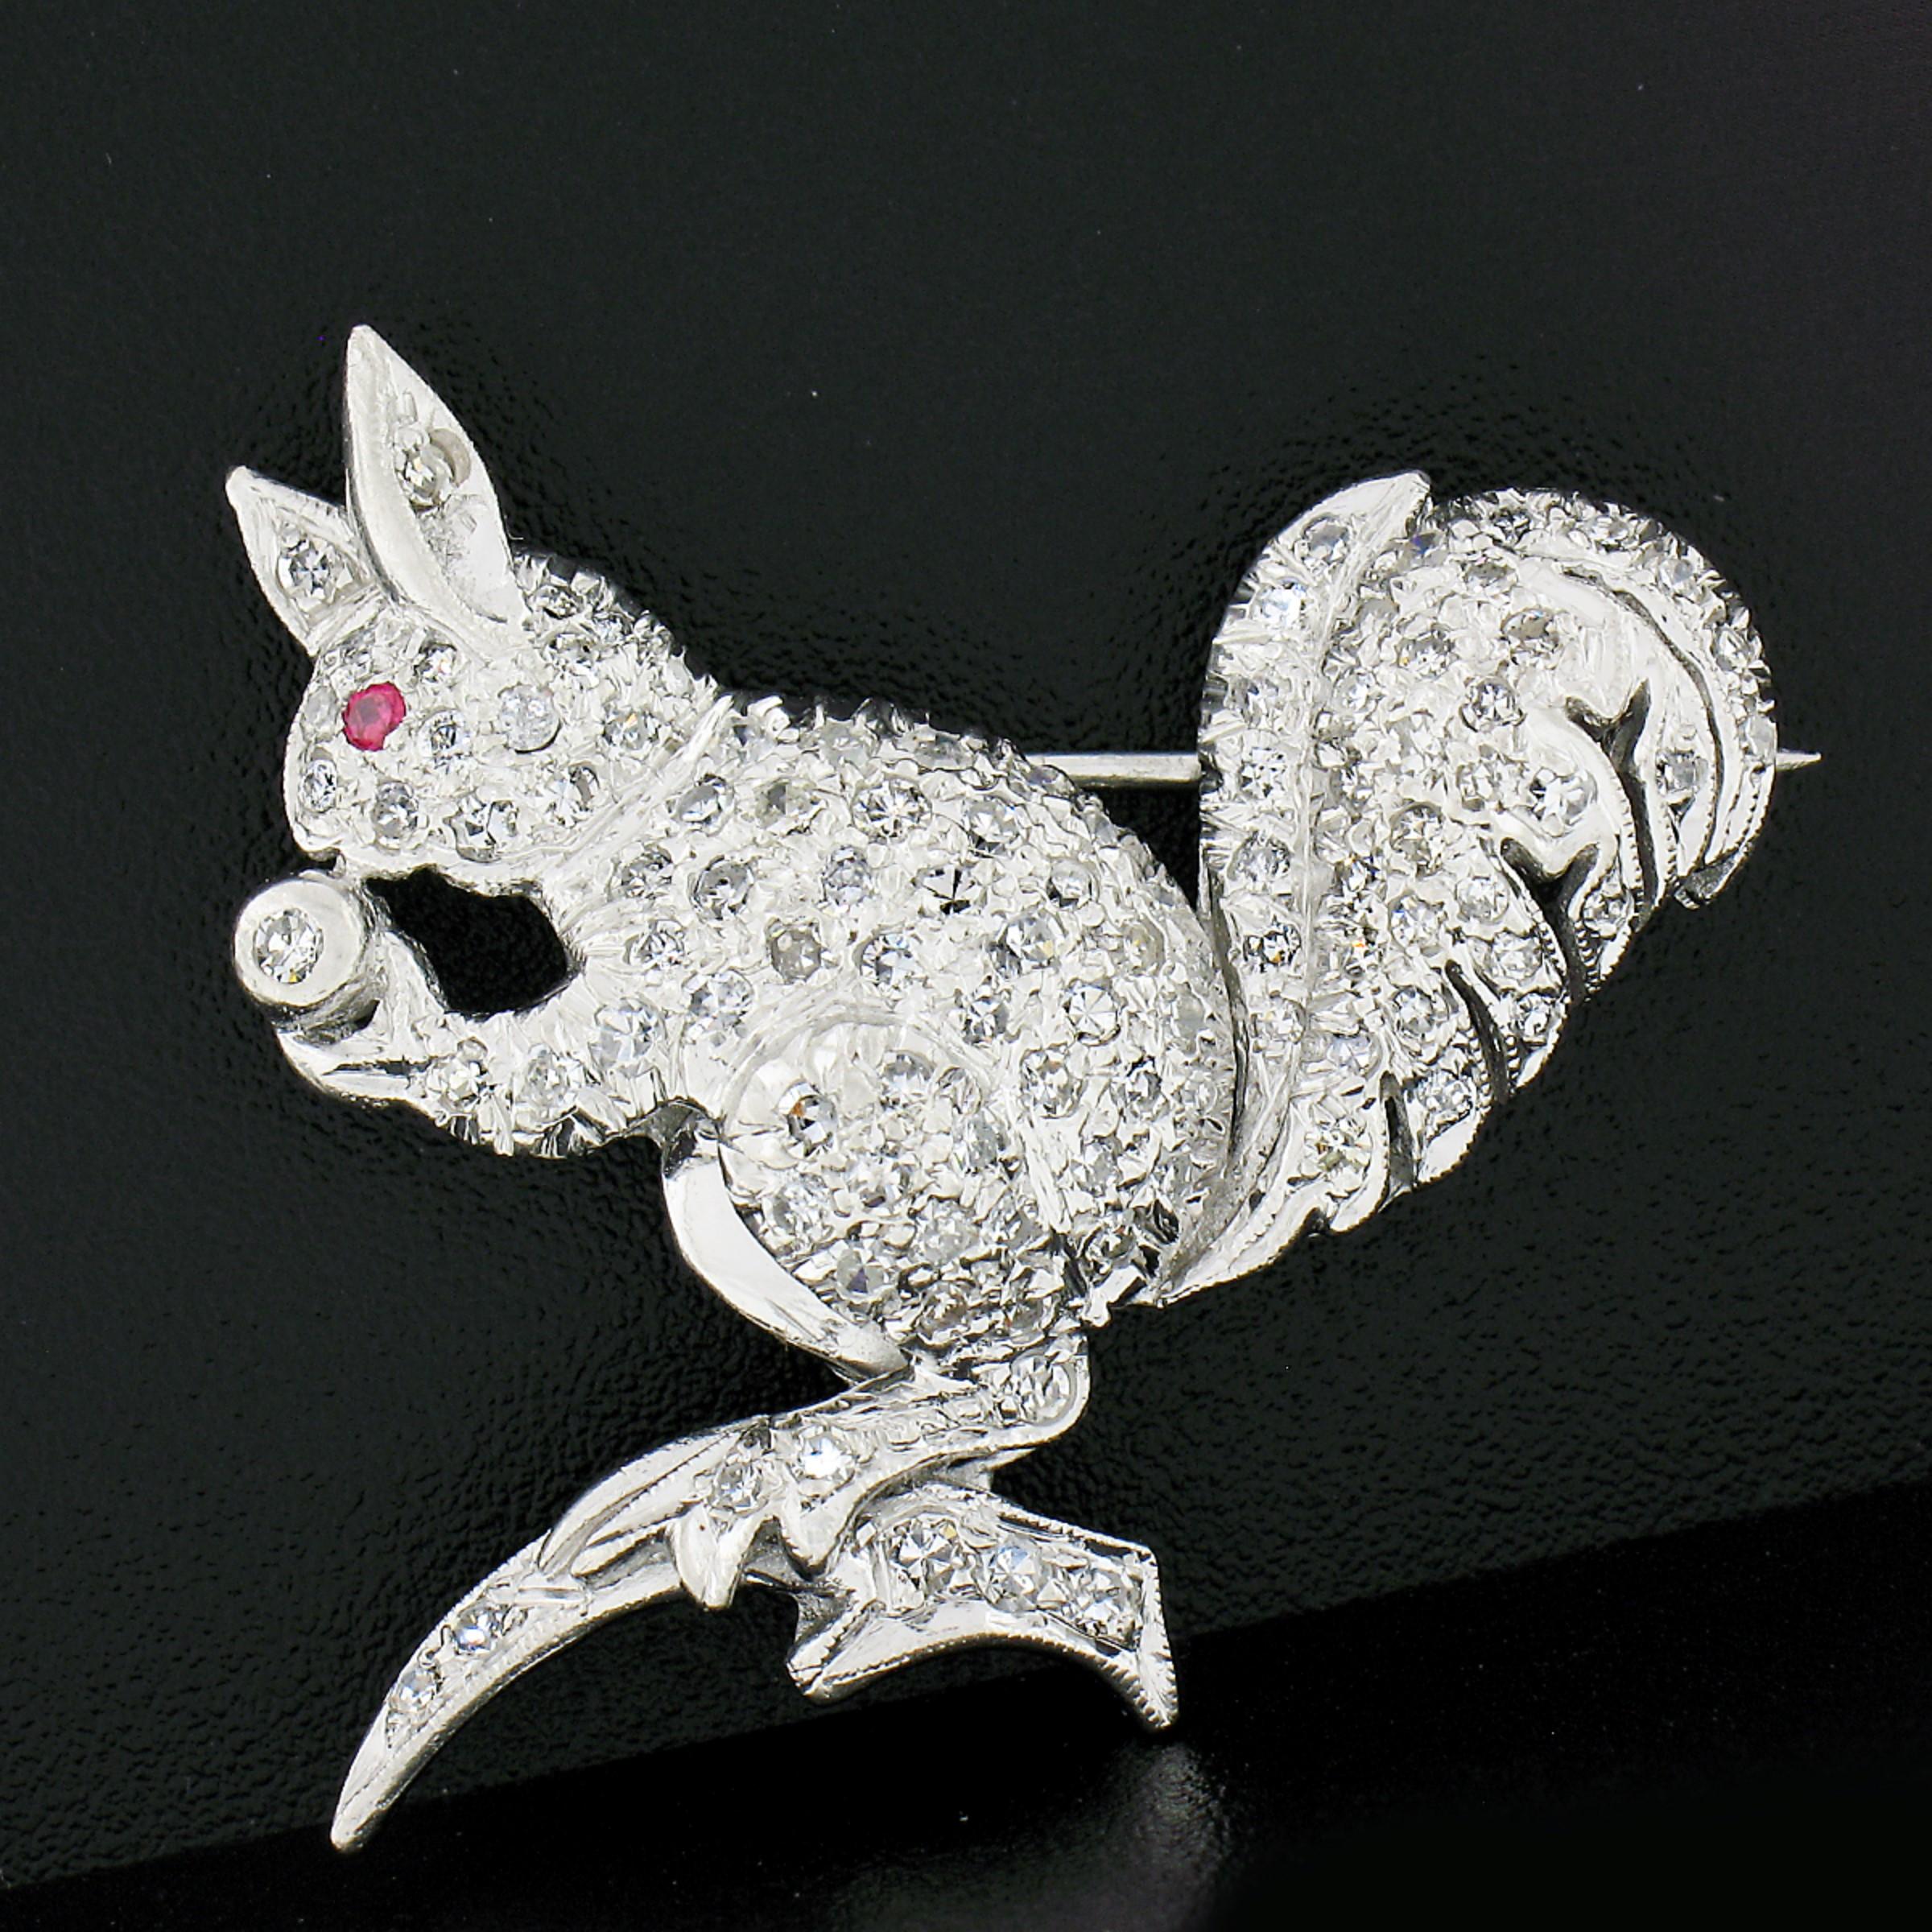 This outstanding antique pin/brooch was crafted in solid platinum during the art deco period and features a well-made squirrel design that is drenched with fine diamonds with a ruby neatly set at the eye. These amazing stones show remarkable